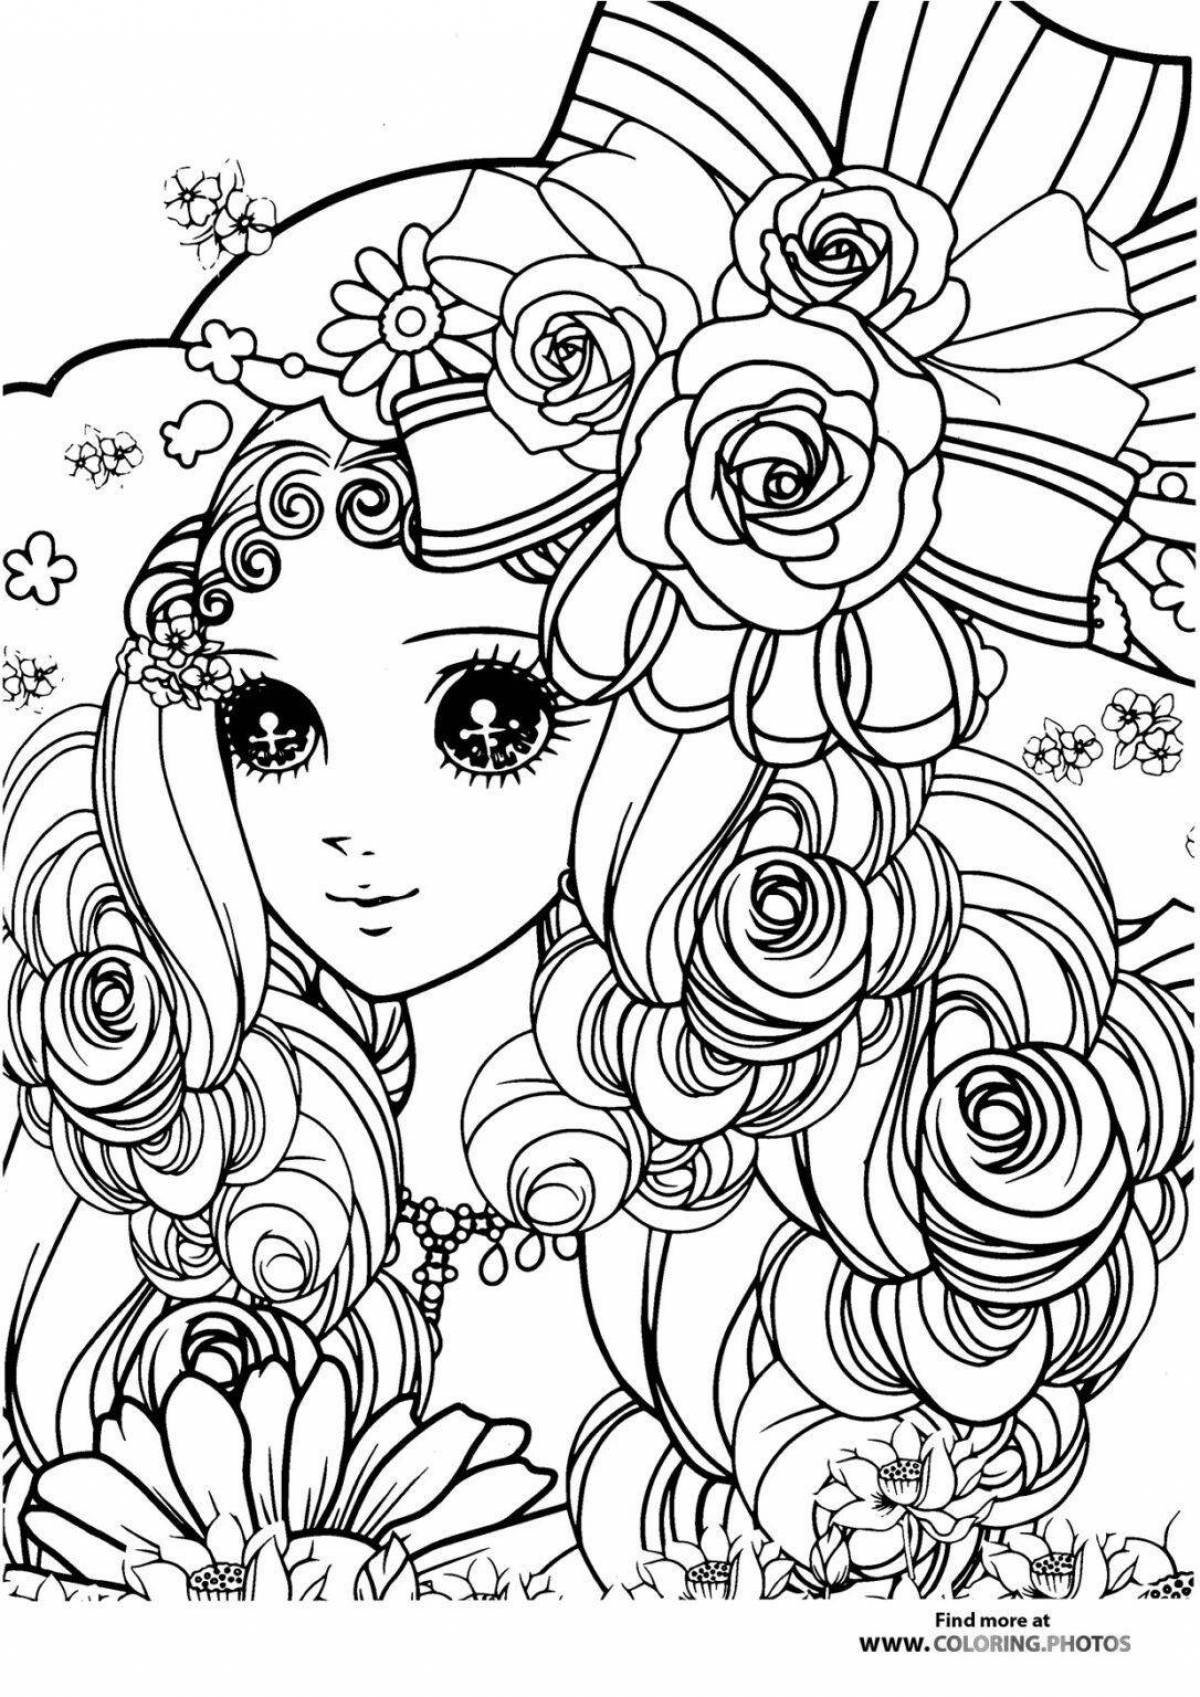 Charming coloring book for girls 13 years old